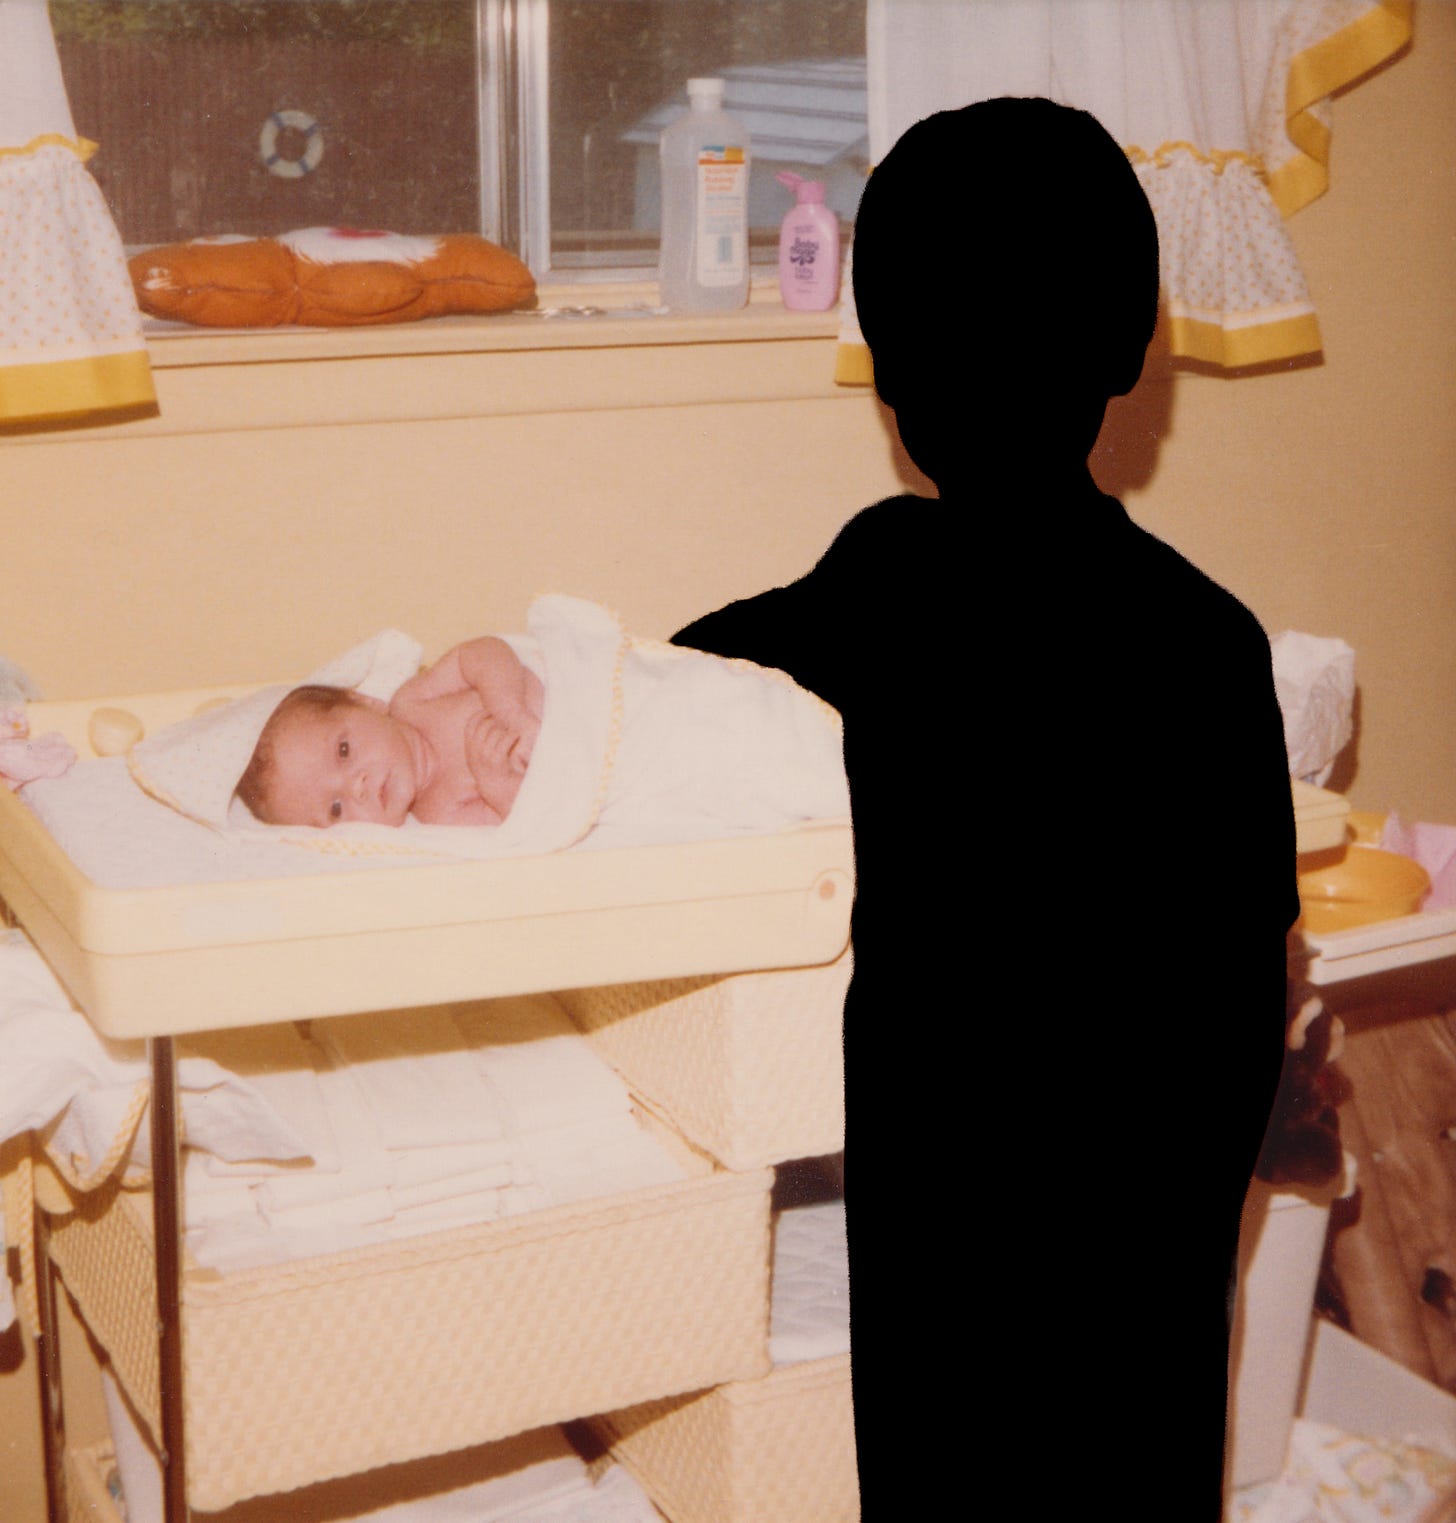 A photo of my brother and I, with him as a black silhouette. I am a baby and he is nine.